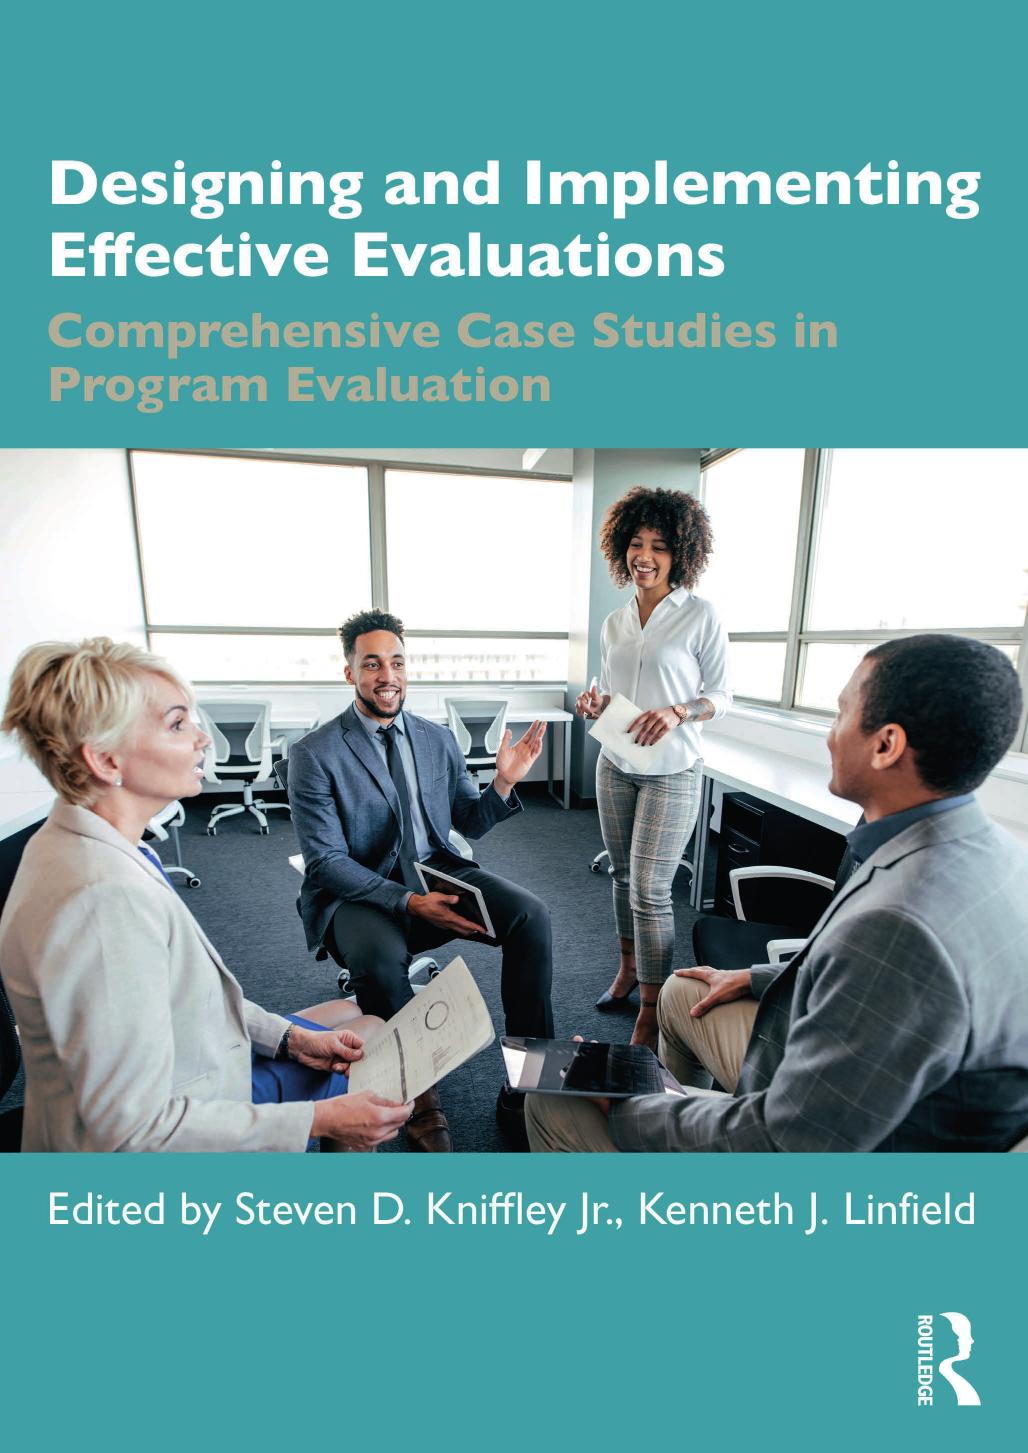 Designing and Implementing Effective Evaluations: Comprehensive Case Studies in Program Evaluation by Kenneth J. Linfield Steven Kniffley